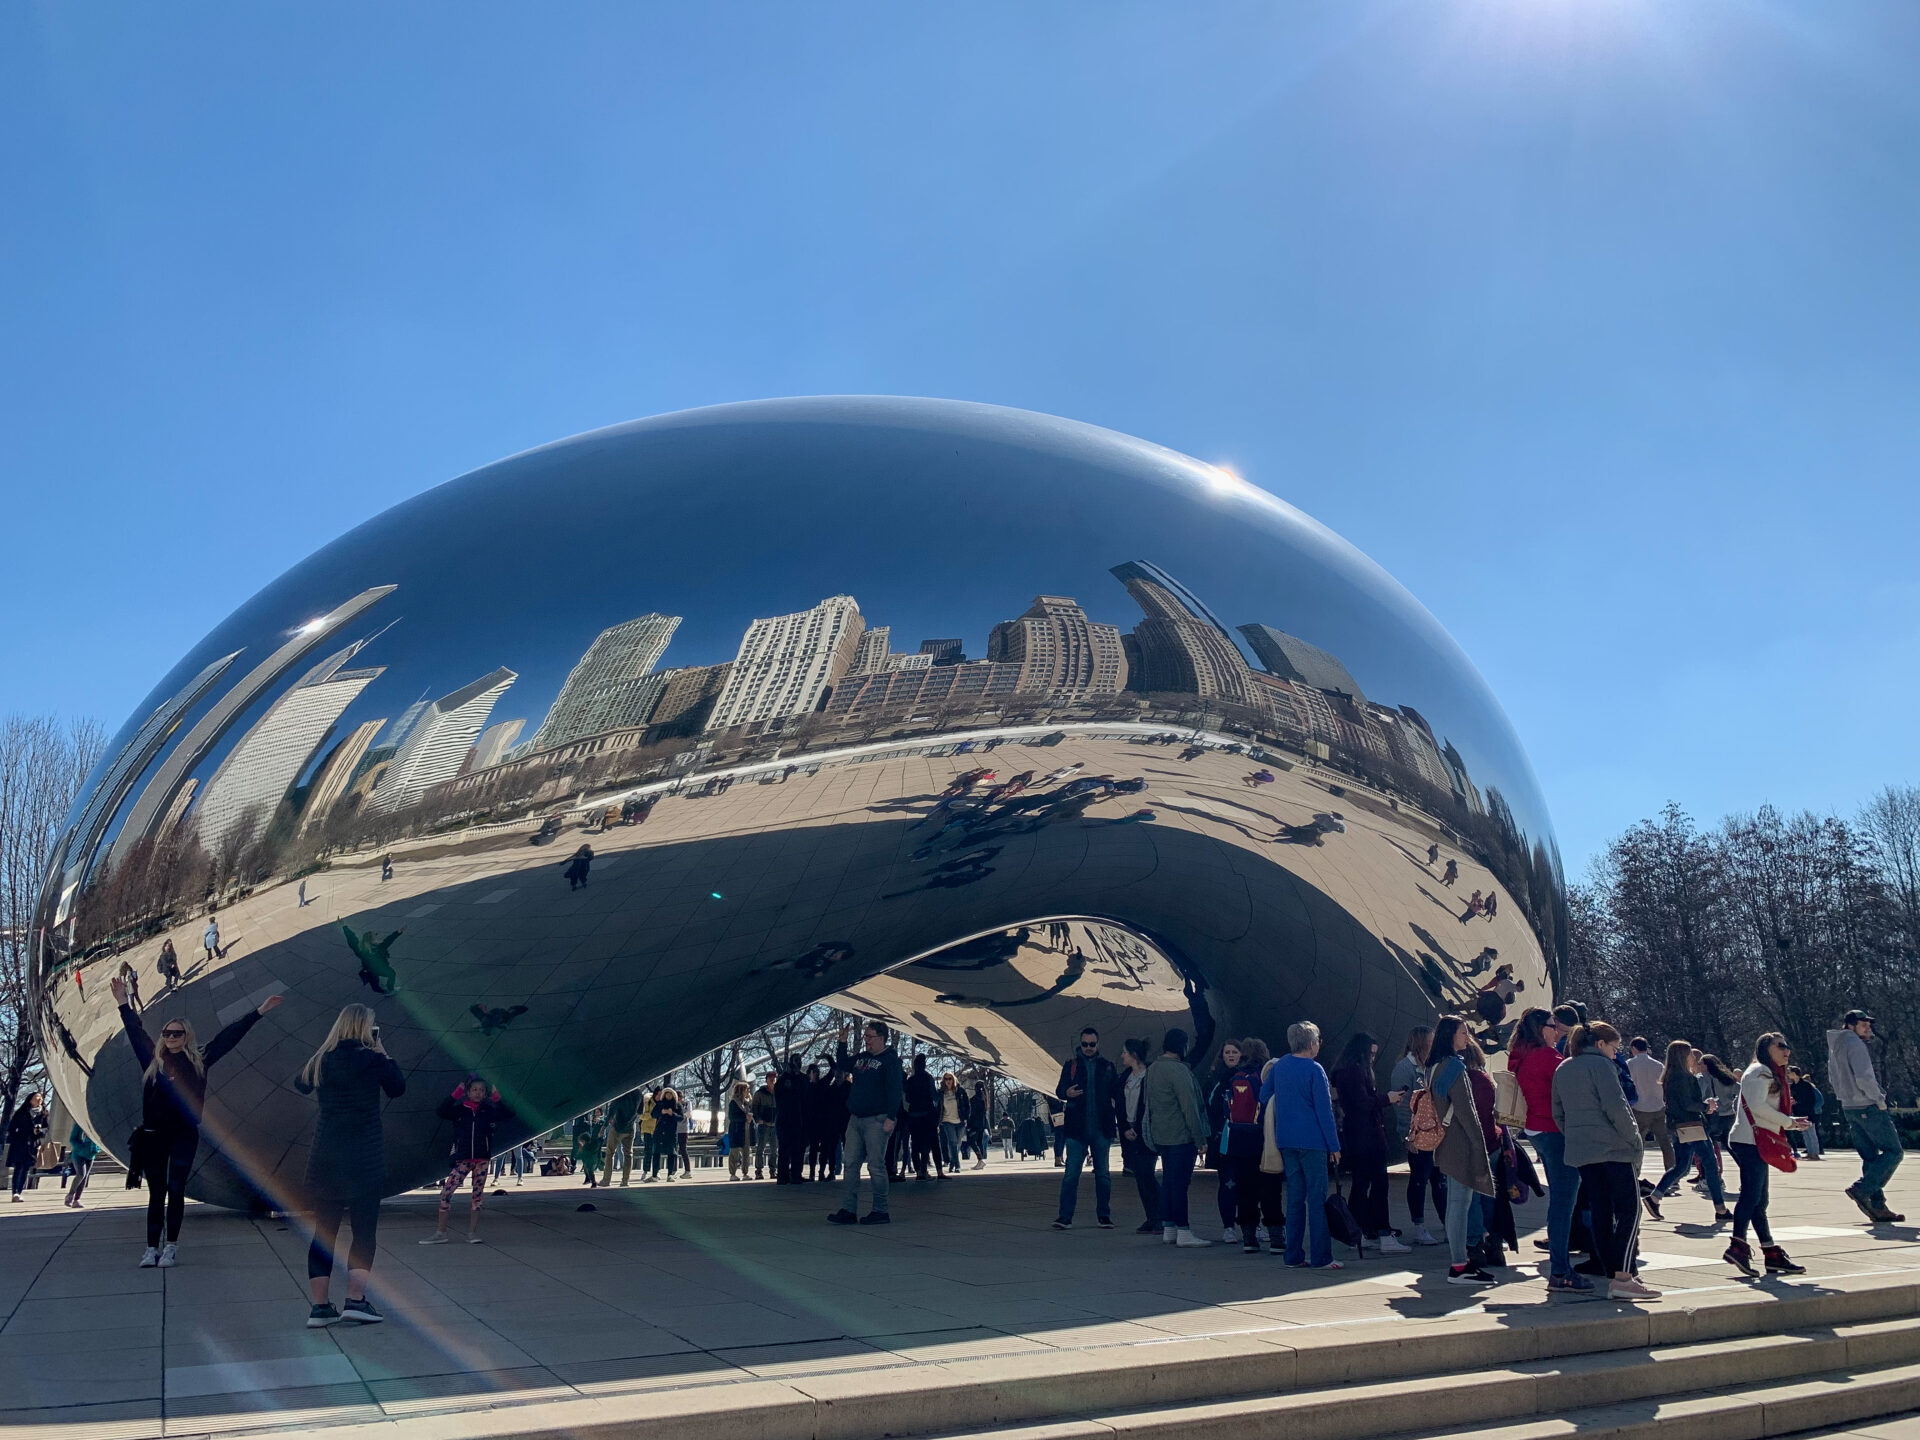 Visit the Bean on your 4 day Chicago itinerary